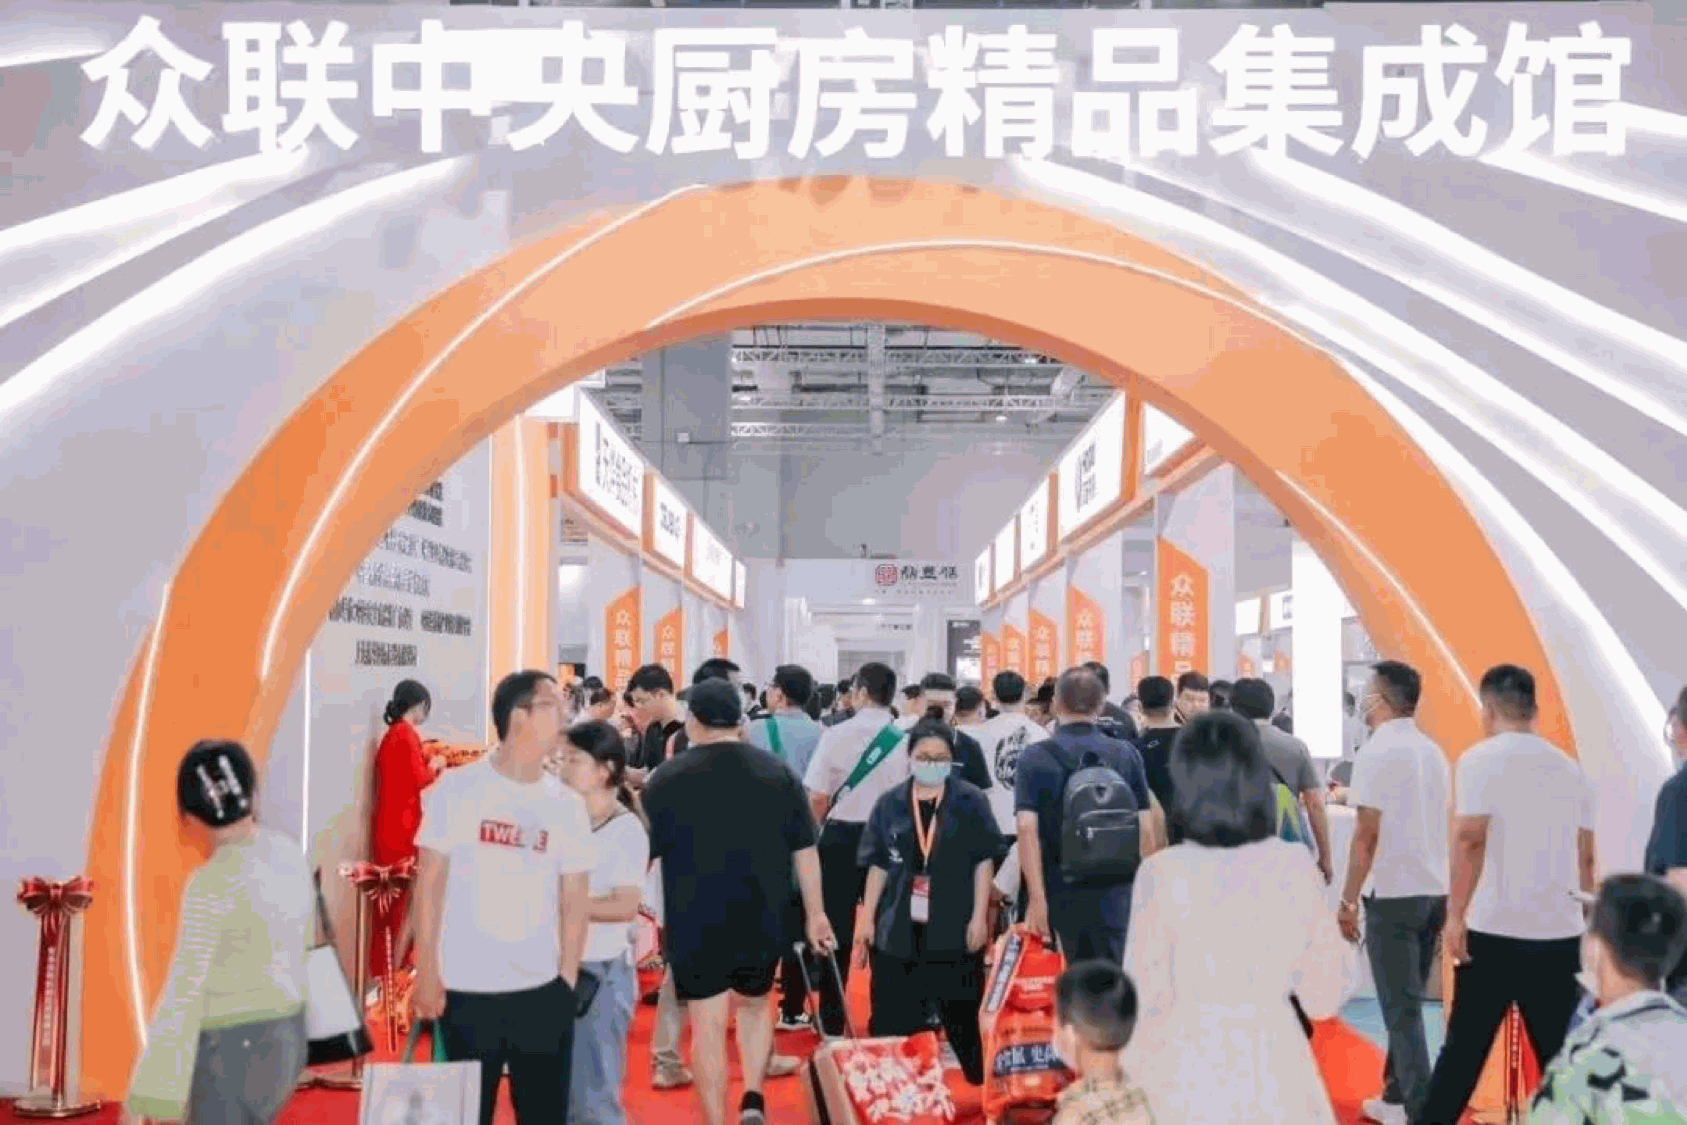 Wiskind attends the HOTELEX Shanghai Expo